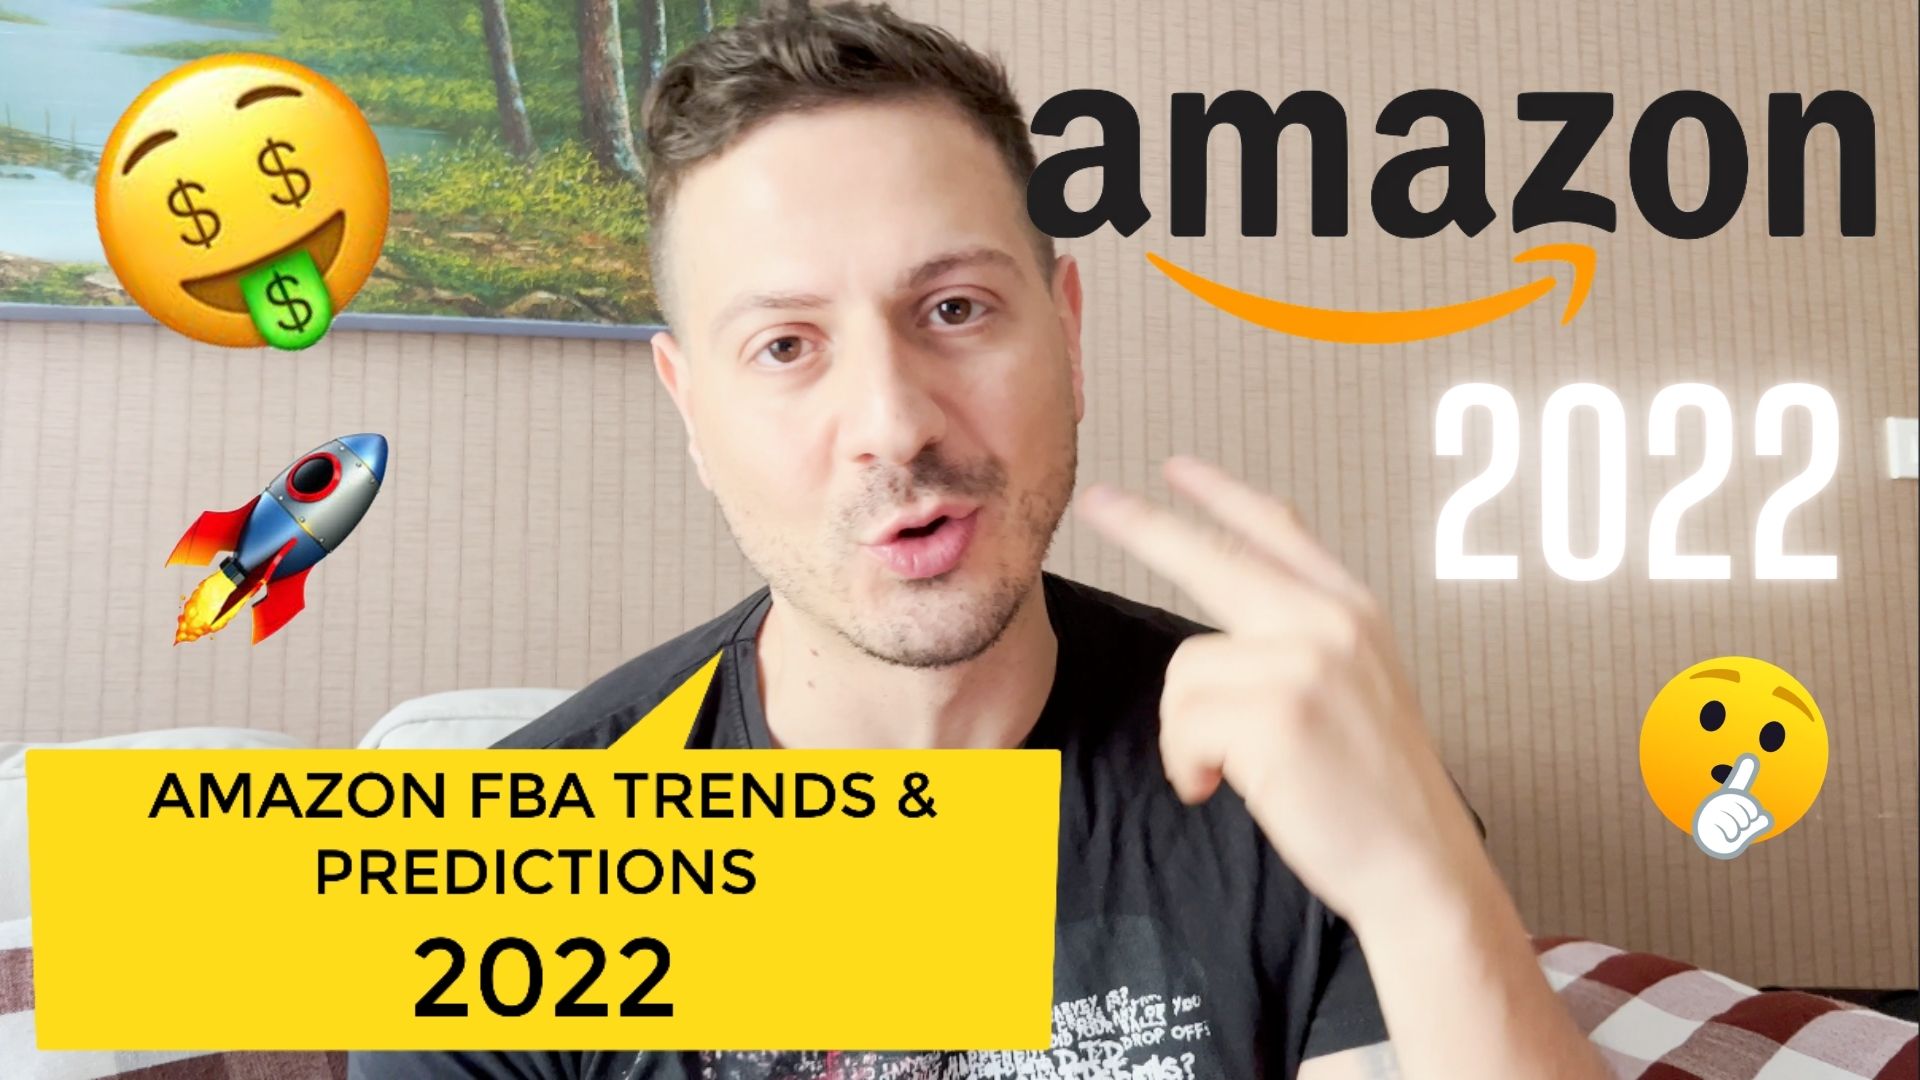 FBA Sellers Trends & Predictions 2022 – Sell on Amazon, Advertising, External Traffic, Supply Chain, Influencers & more